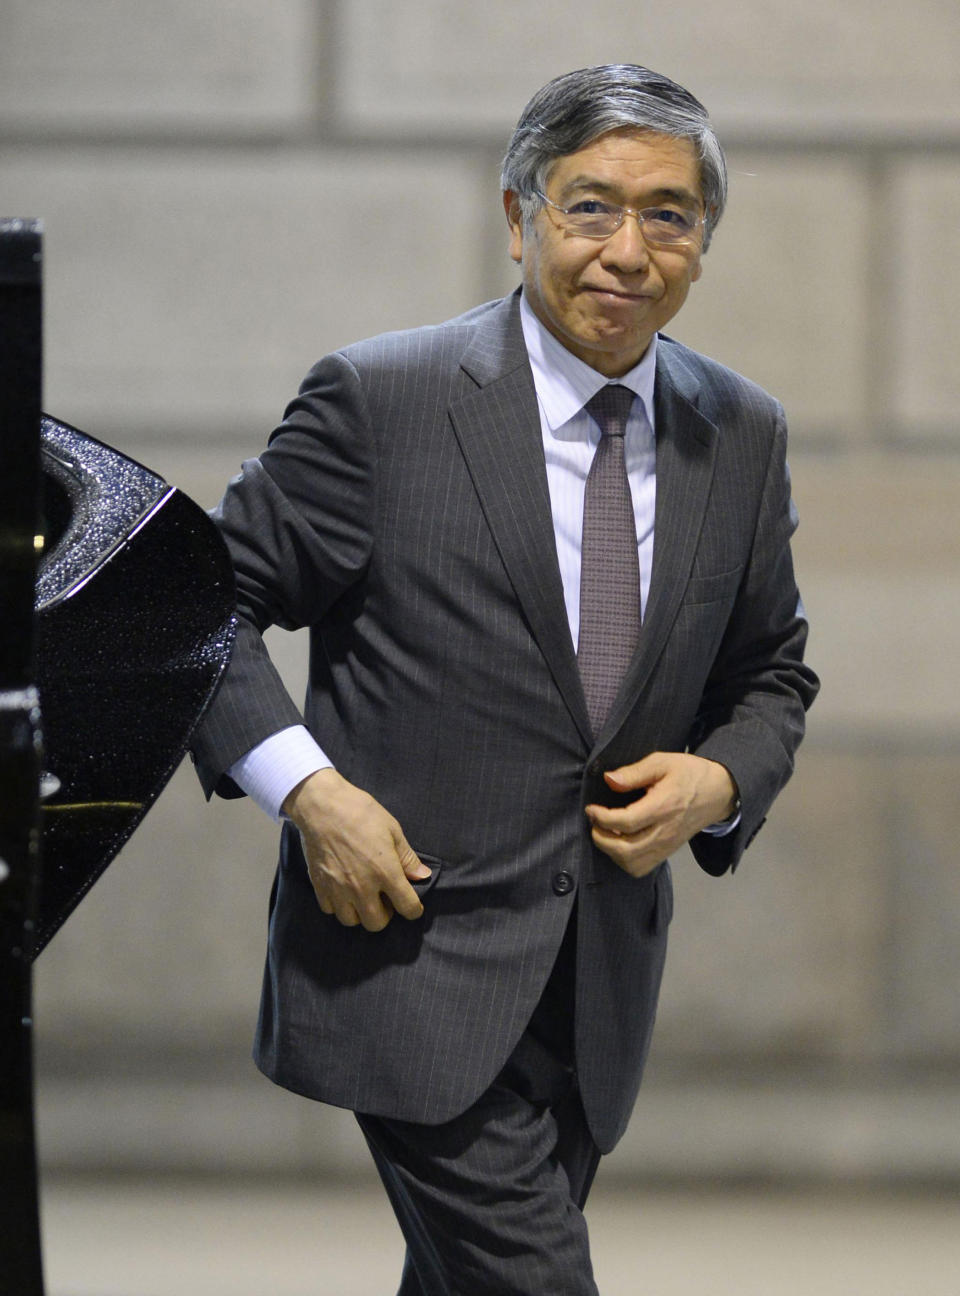 Bank of Japan Gov. Haruhiko Kuroda heads to a meeting at the headquarters of Bank of Japan in Tokyo, Wednesday, April 30, 2014. Japan's central bank was meeting Wednesday to assess the status of the country's economic recovery, as monthly data showed industrial output and wage growth falling short of expectations. (AP Photo/Kyodo News) JAPAN OUT, MANDATORY CREDIT